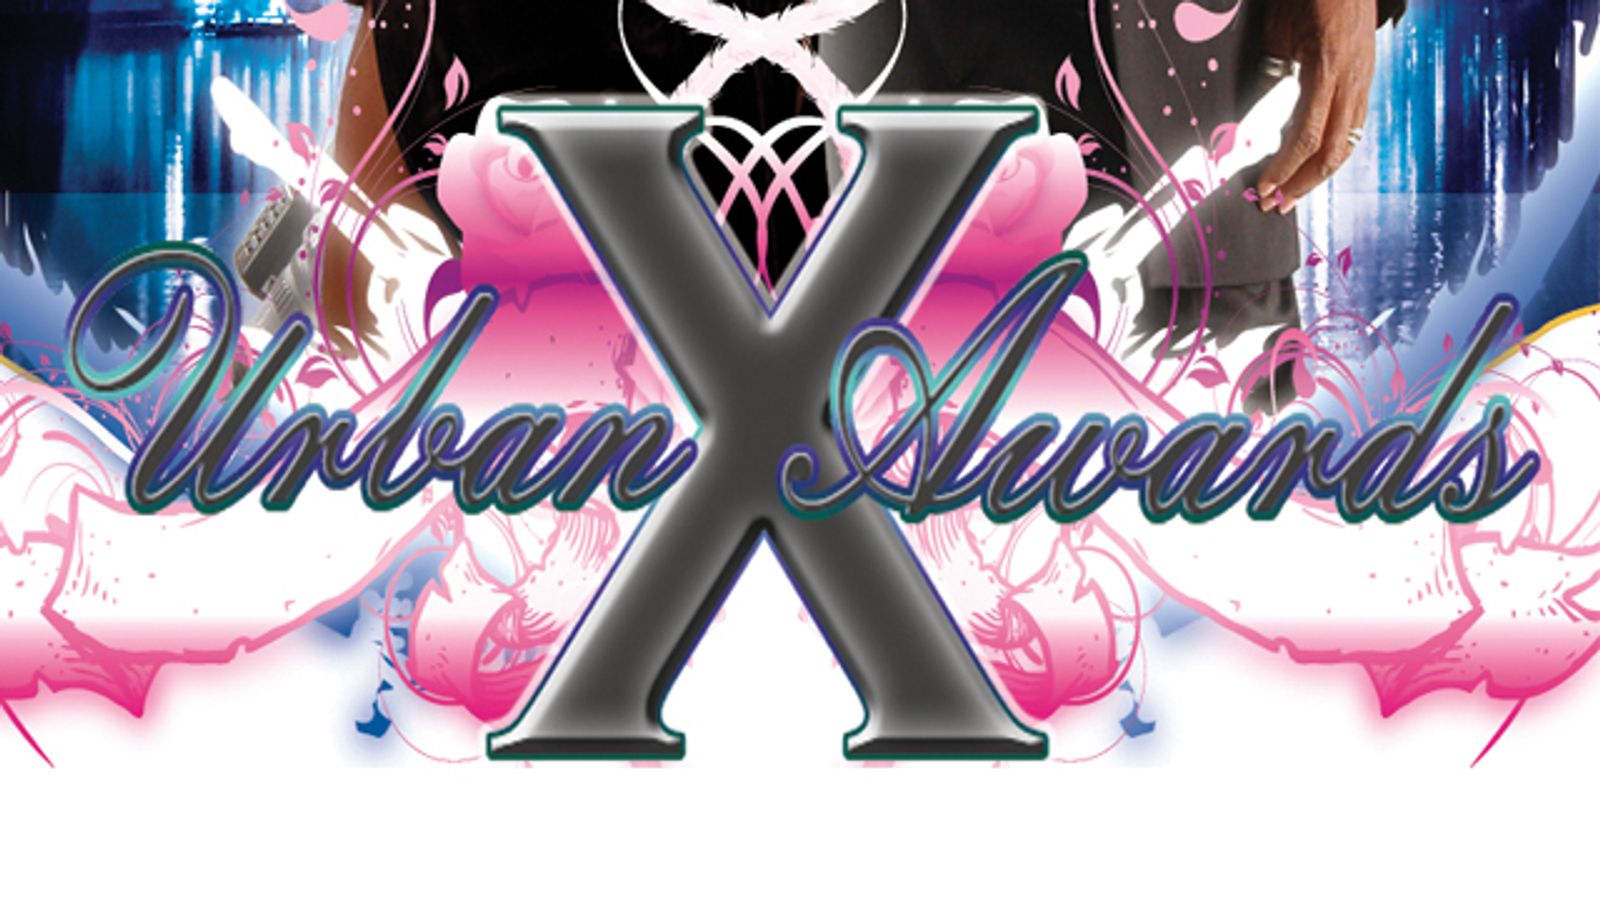 Announcing the 5th Annual Urban X Awards and Dinner Gala